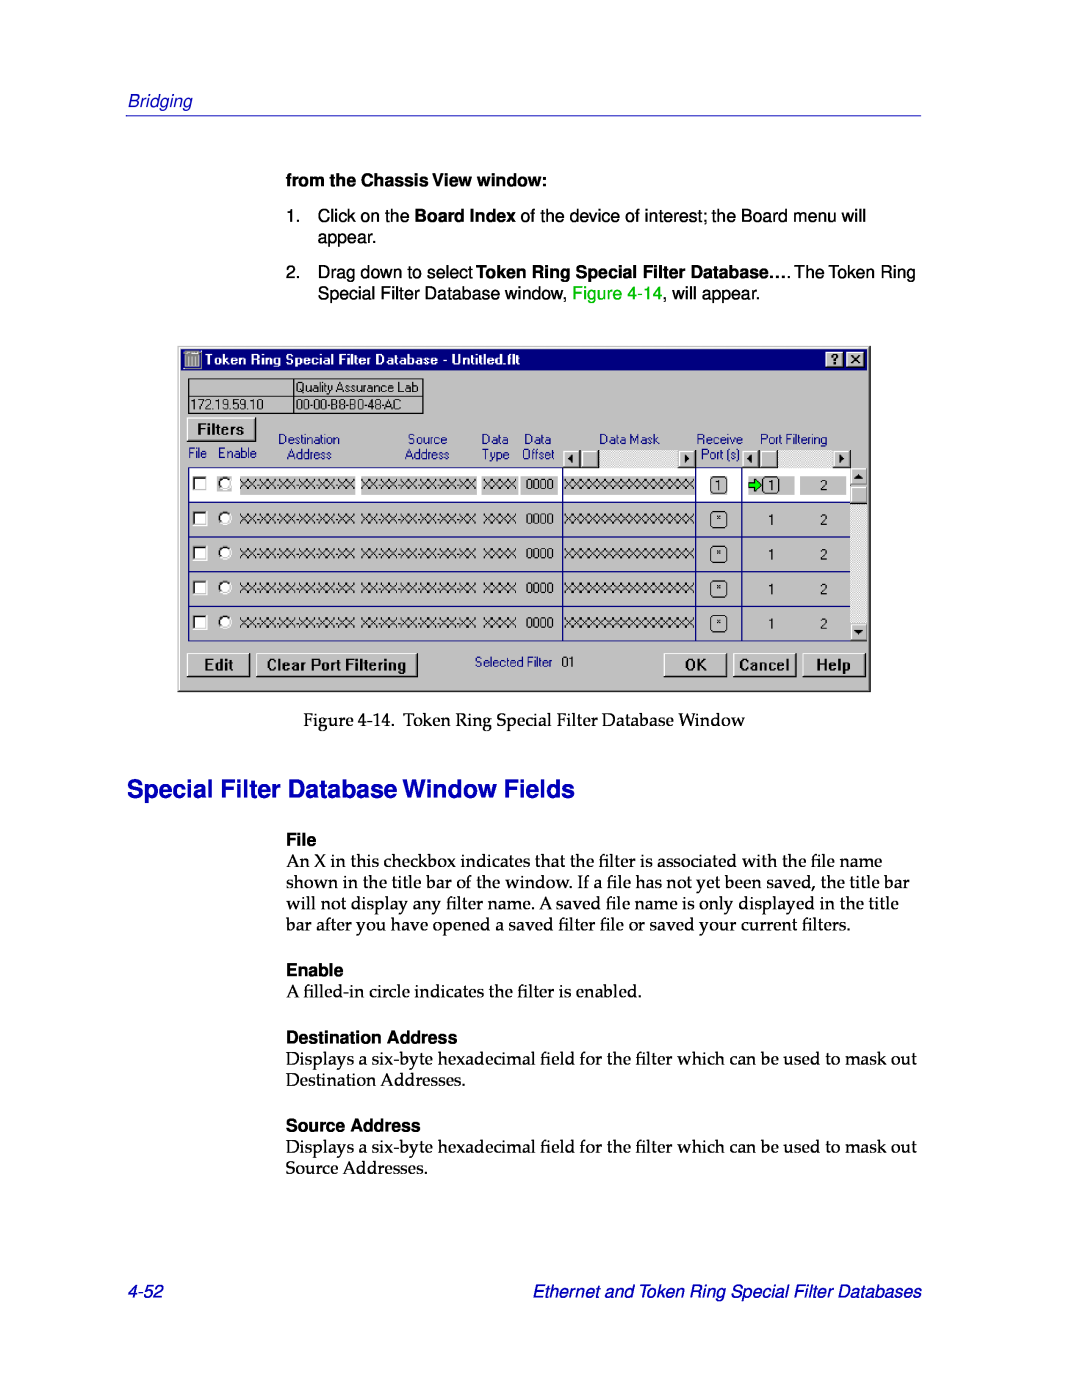 Cabletron Systems CSX400 Special Filter Database Window Fields, File, Enable, Destination Address, Source Address, 4-52 